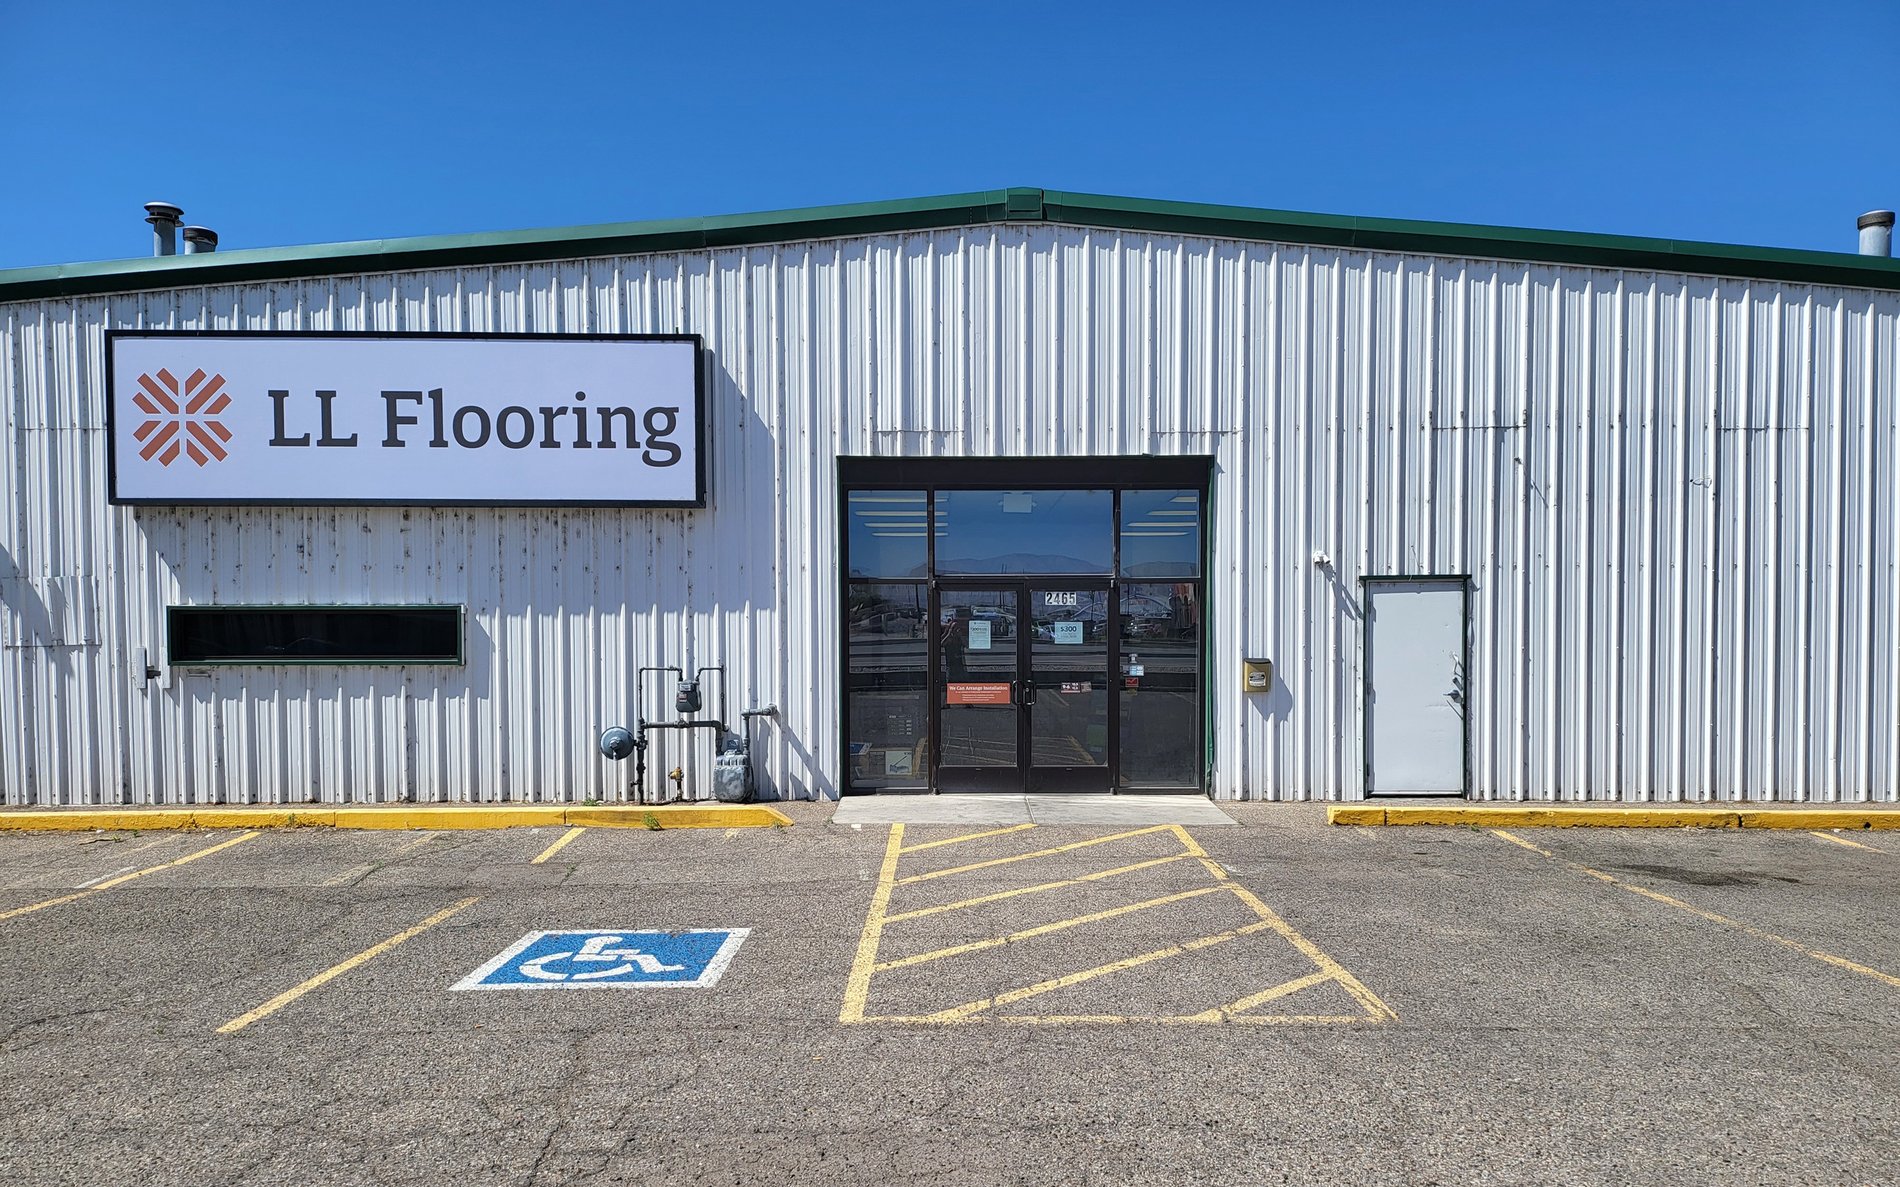 LL Flooring #1260 Grand Junction | 2465 Highway 6 and 50 | Storefront